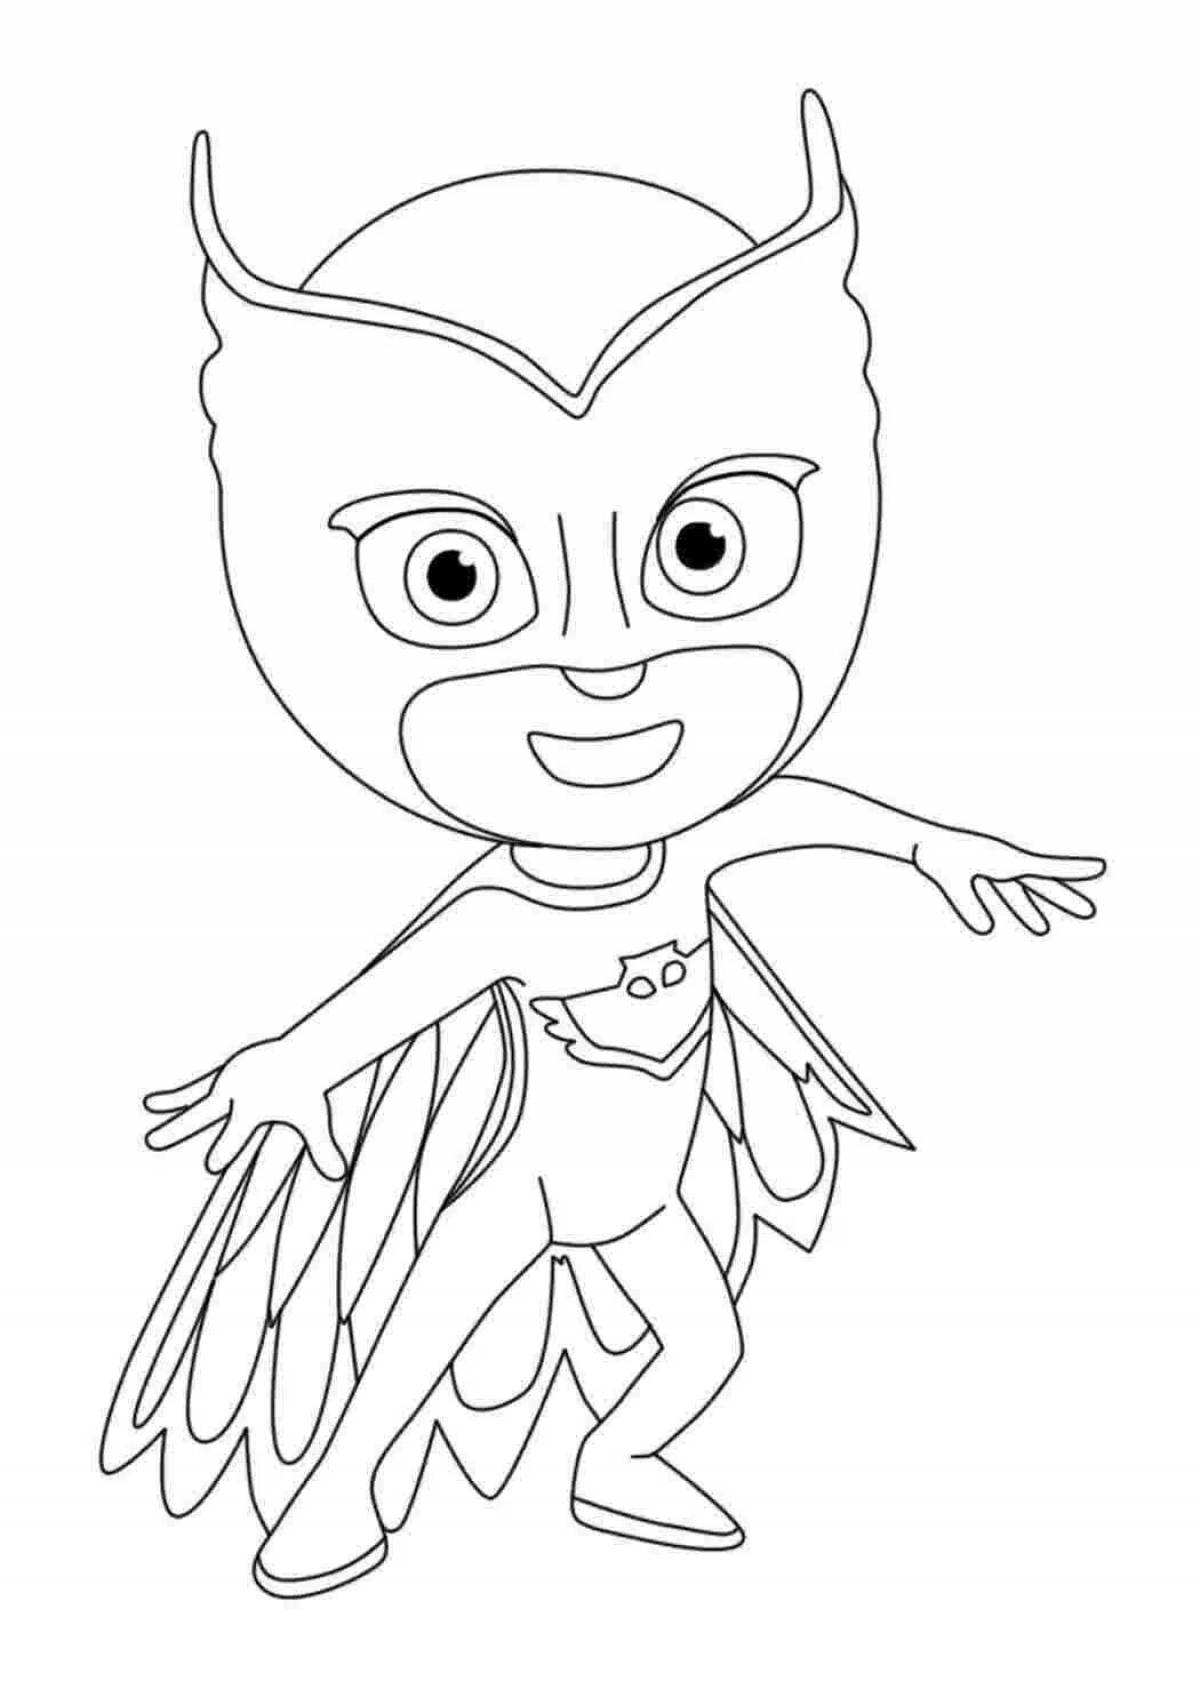 Magical heroes in masks for children 3-4 years old